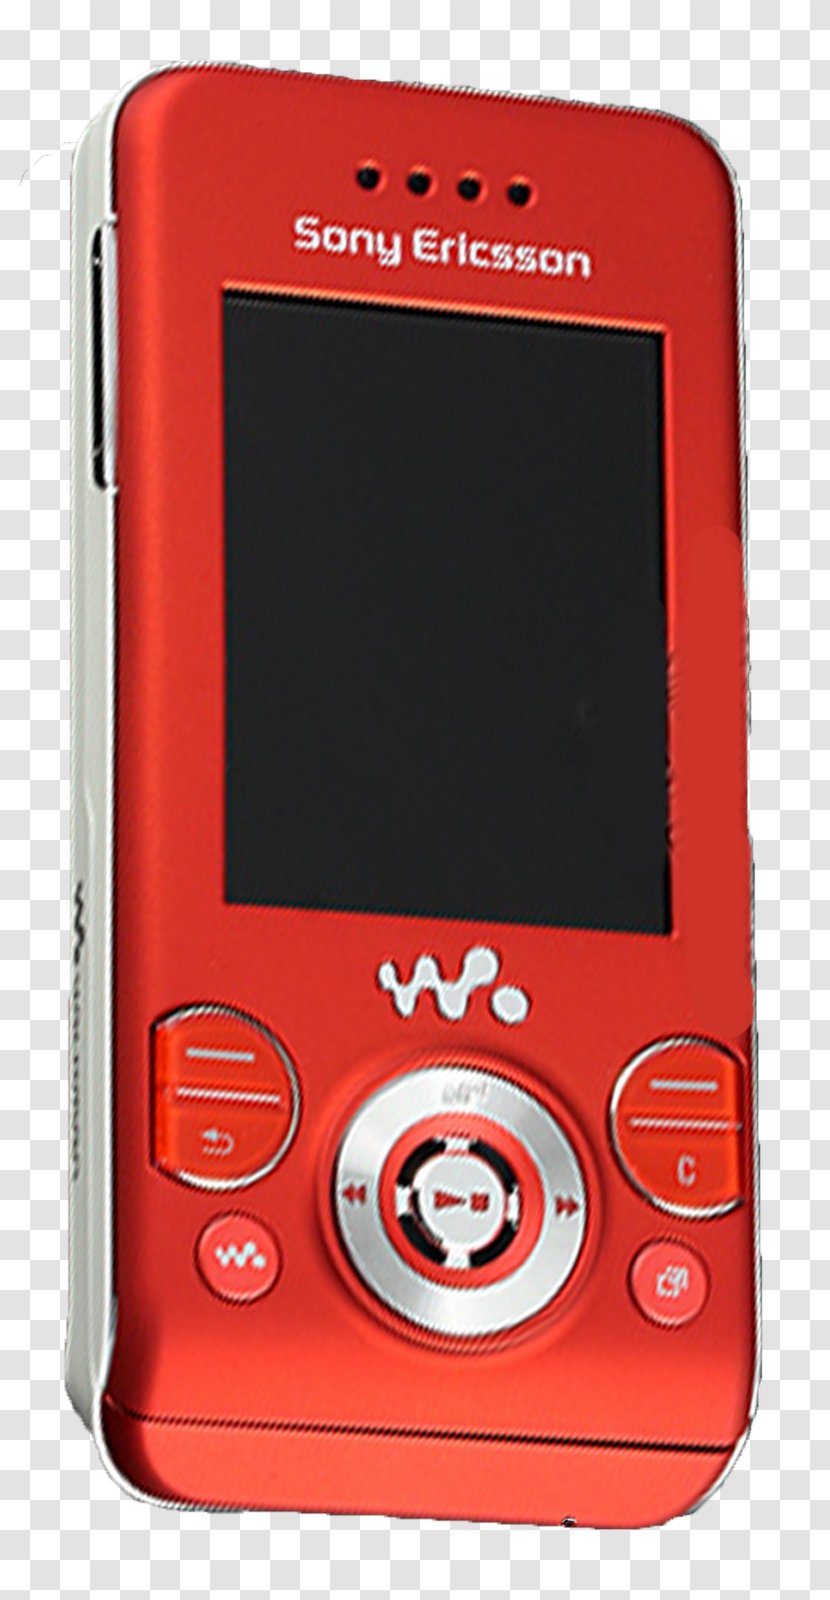 Feature Phone Sony Ericsson W580i Mobile Accessories Handheld Devices - Portable Communications Device - Multimedia Transparent PNG